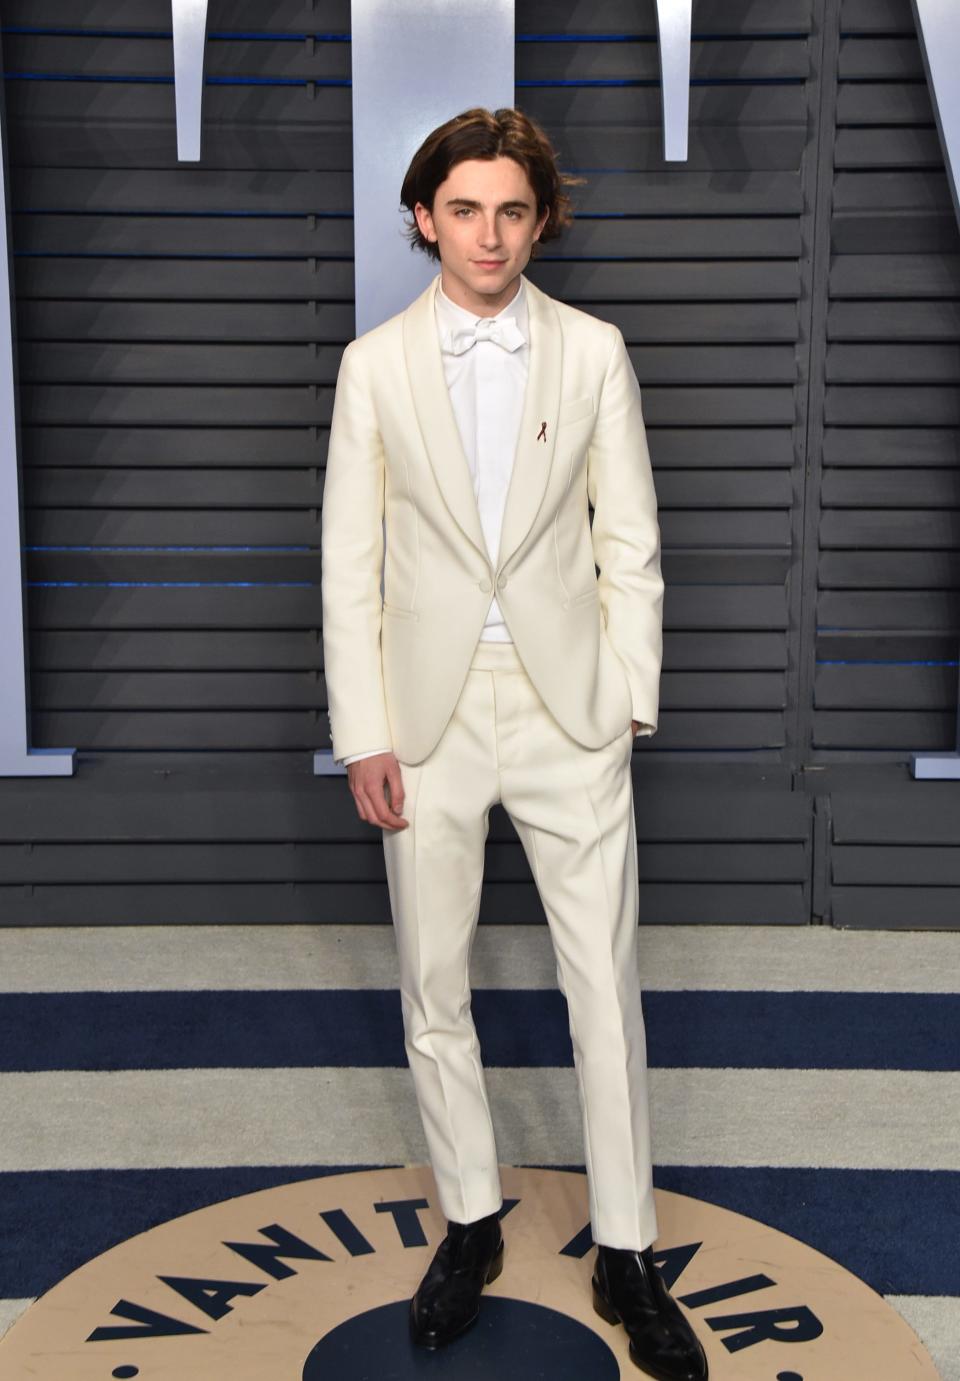 Timothee Chalamet attends the 2018 Vanity Fair Oscar Party